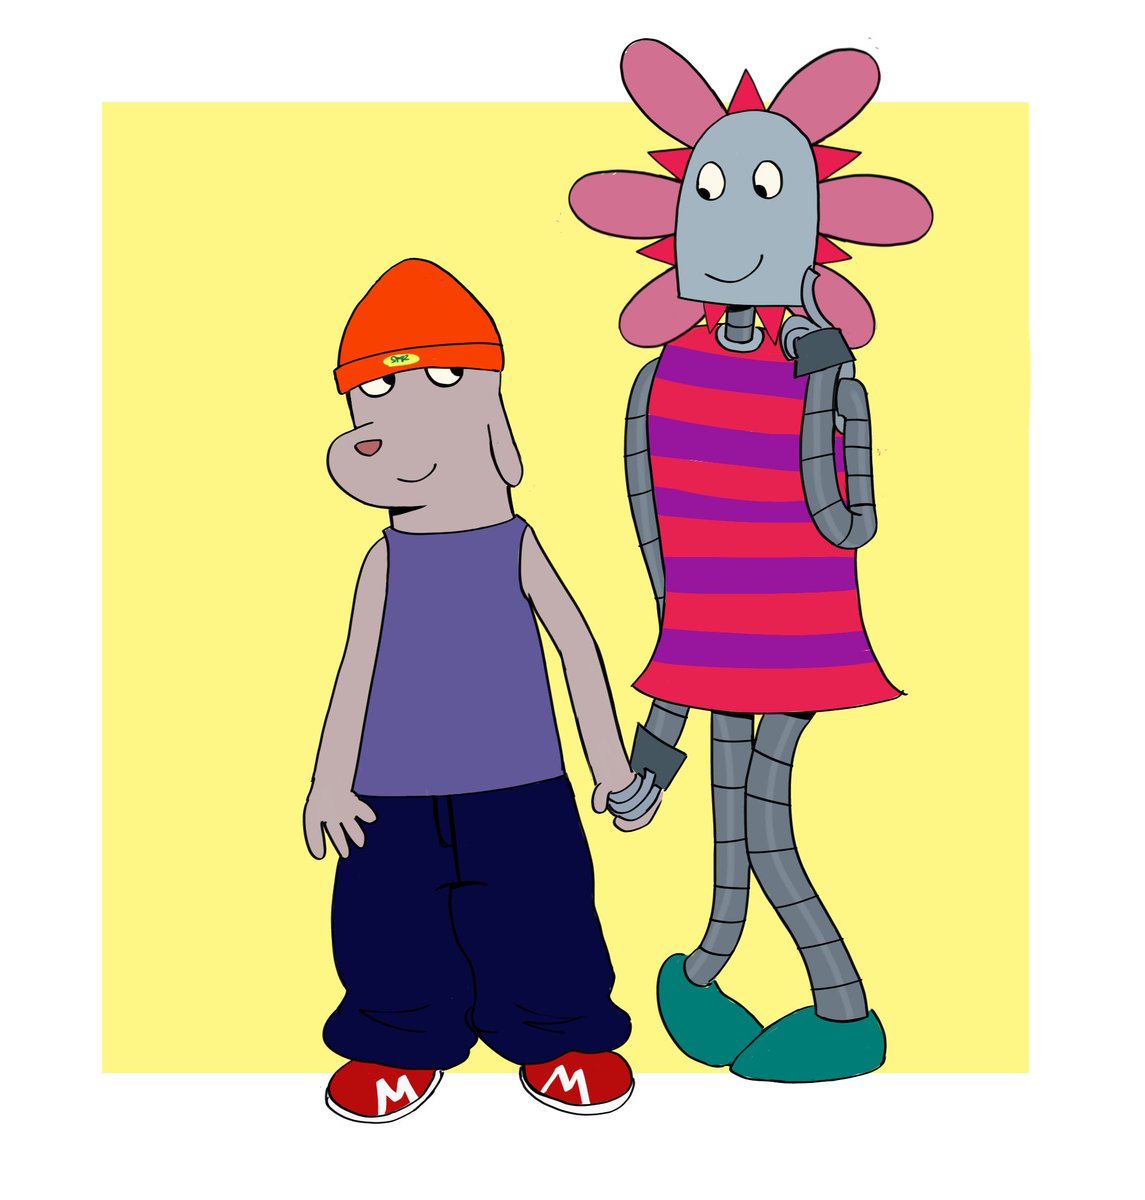 Someone called dog  parappa the rapper and i found out he has a gf so  . #robotdreams